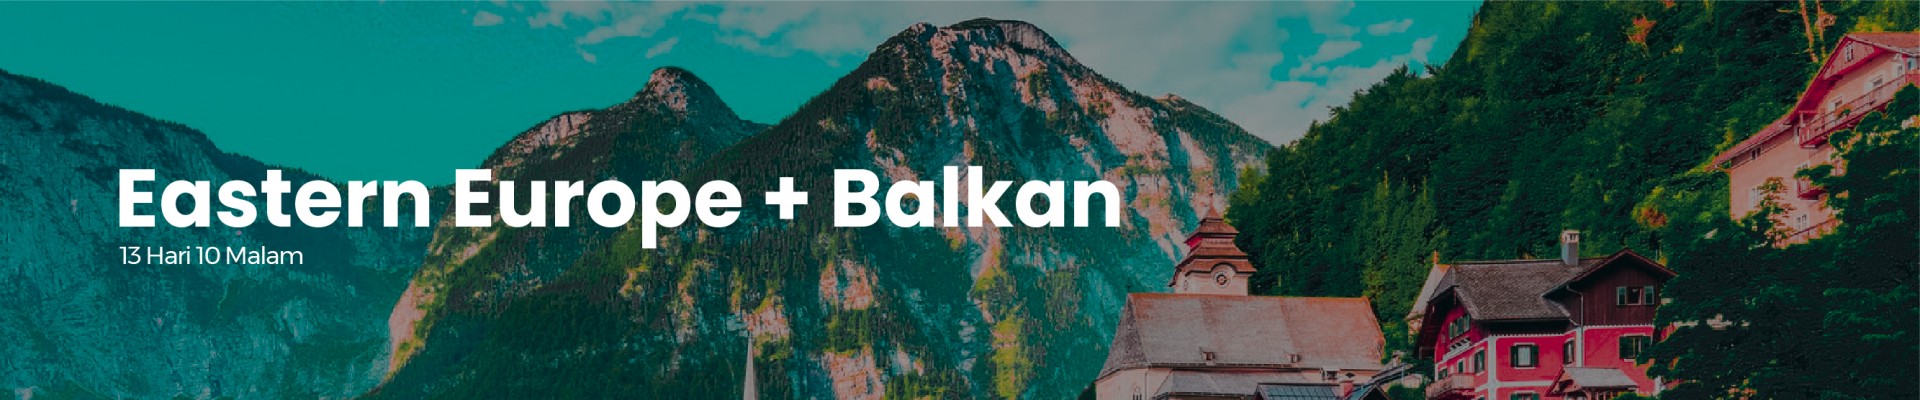 13 DAYS 10 NIGHTS DISCOVERY OF EASTERN EUROPE + BALKAN